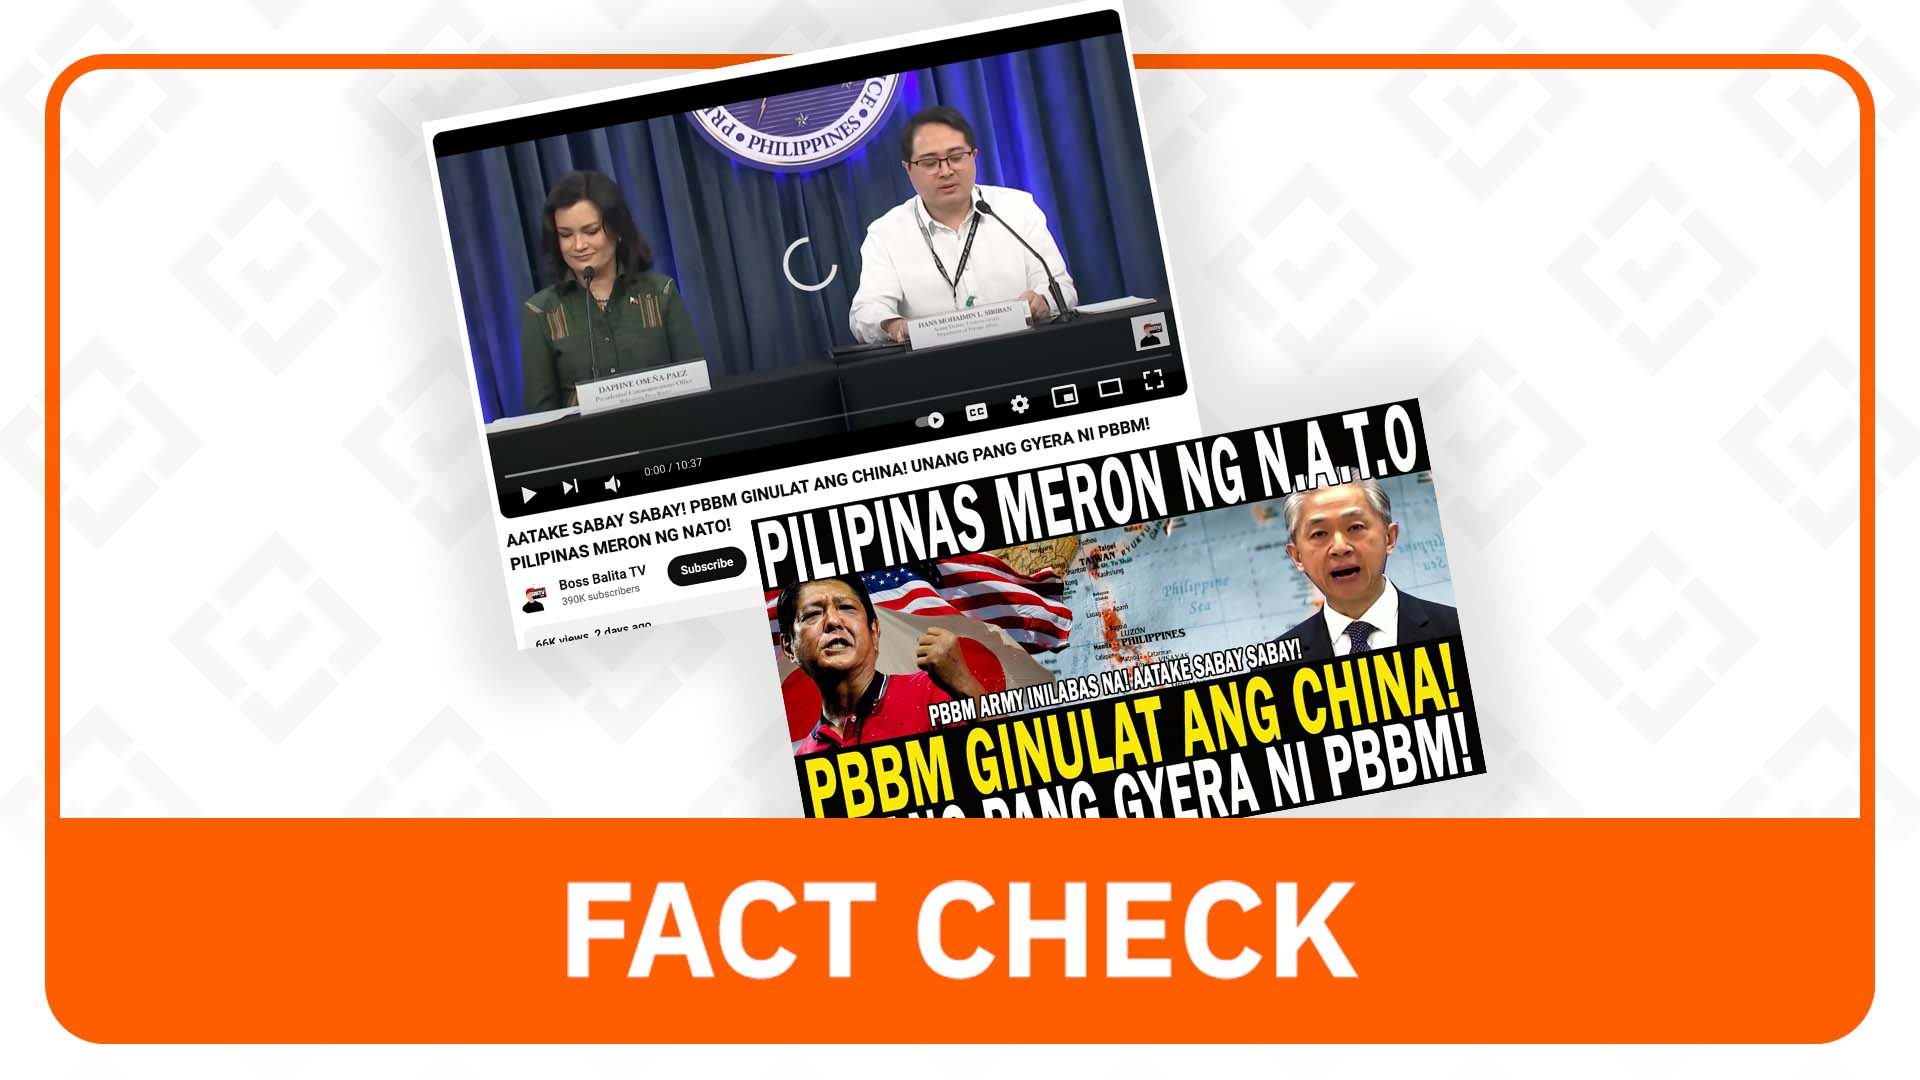 FACT CHECK: PH has not formed its own version of NATO